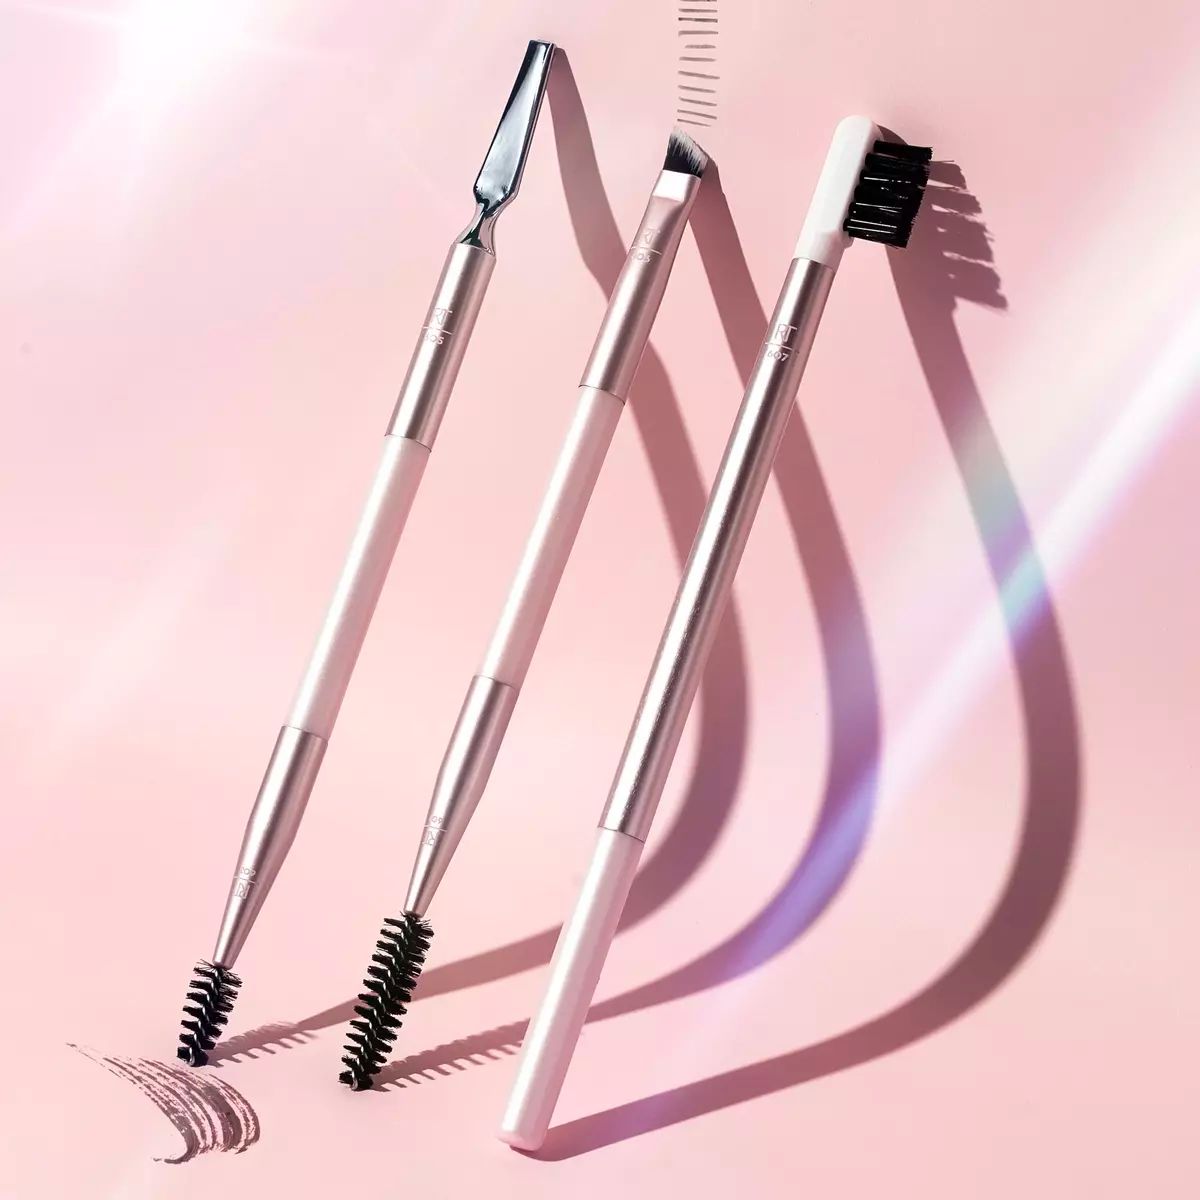 Real Techniques Brow Styling Makeup Brush and Tool Set displayed on a pink background